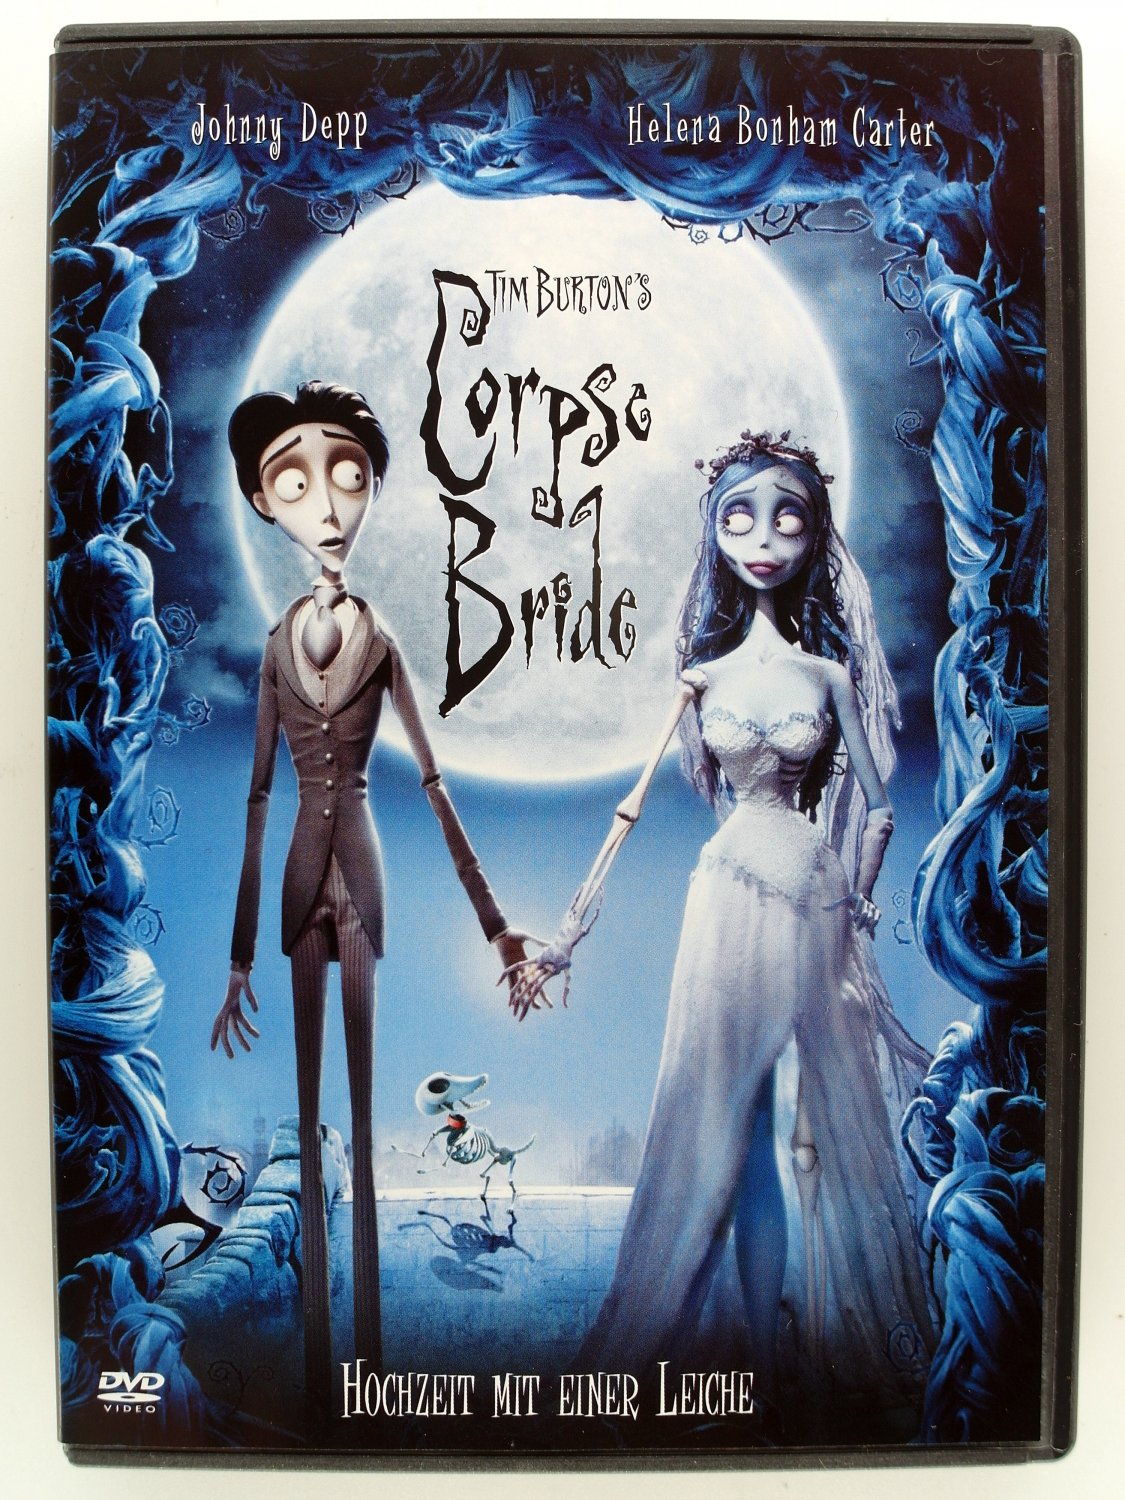 And The Corpse Bride